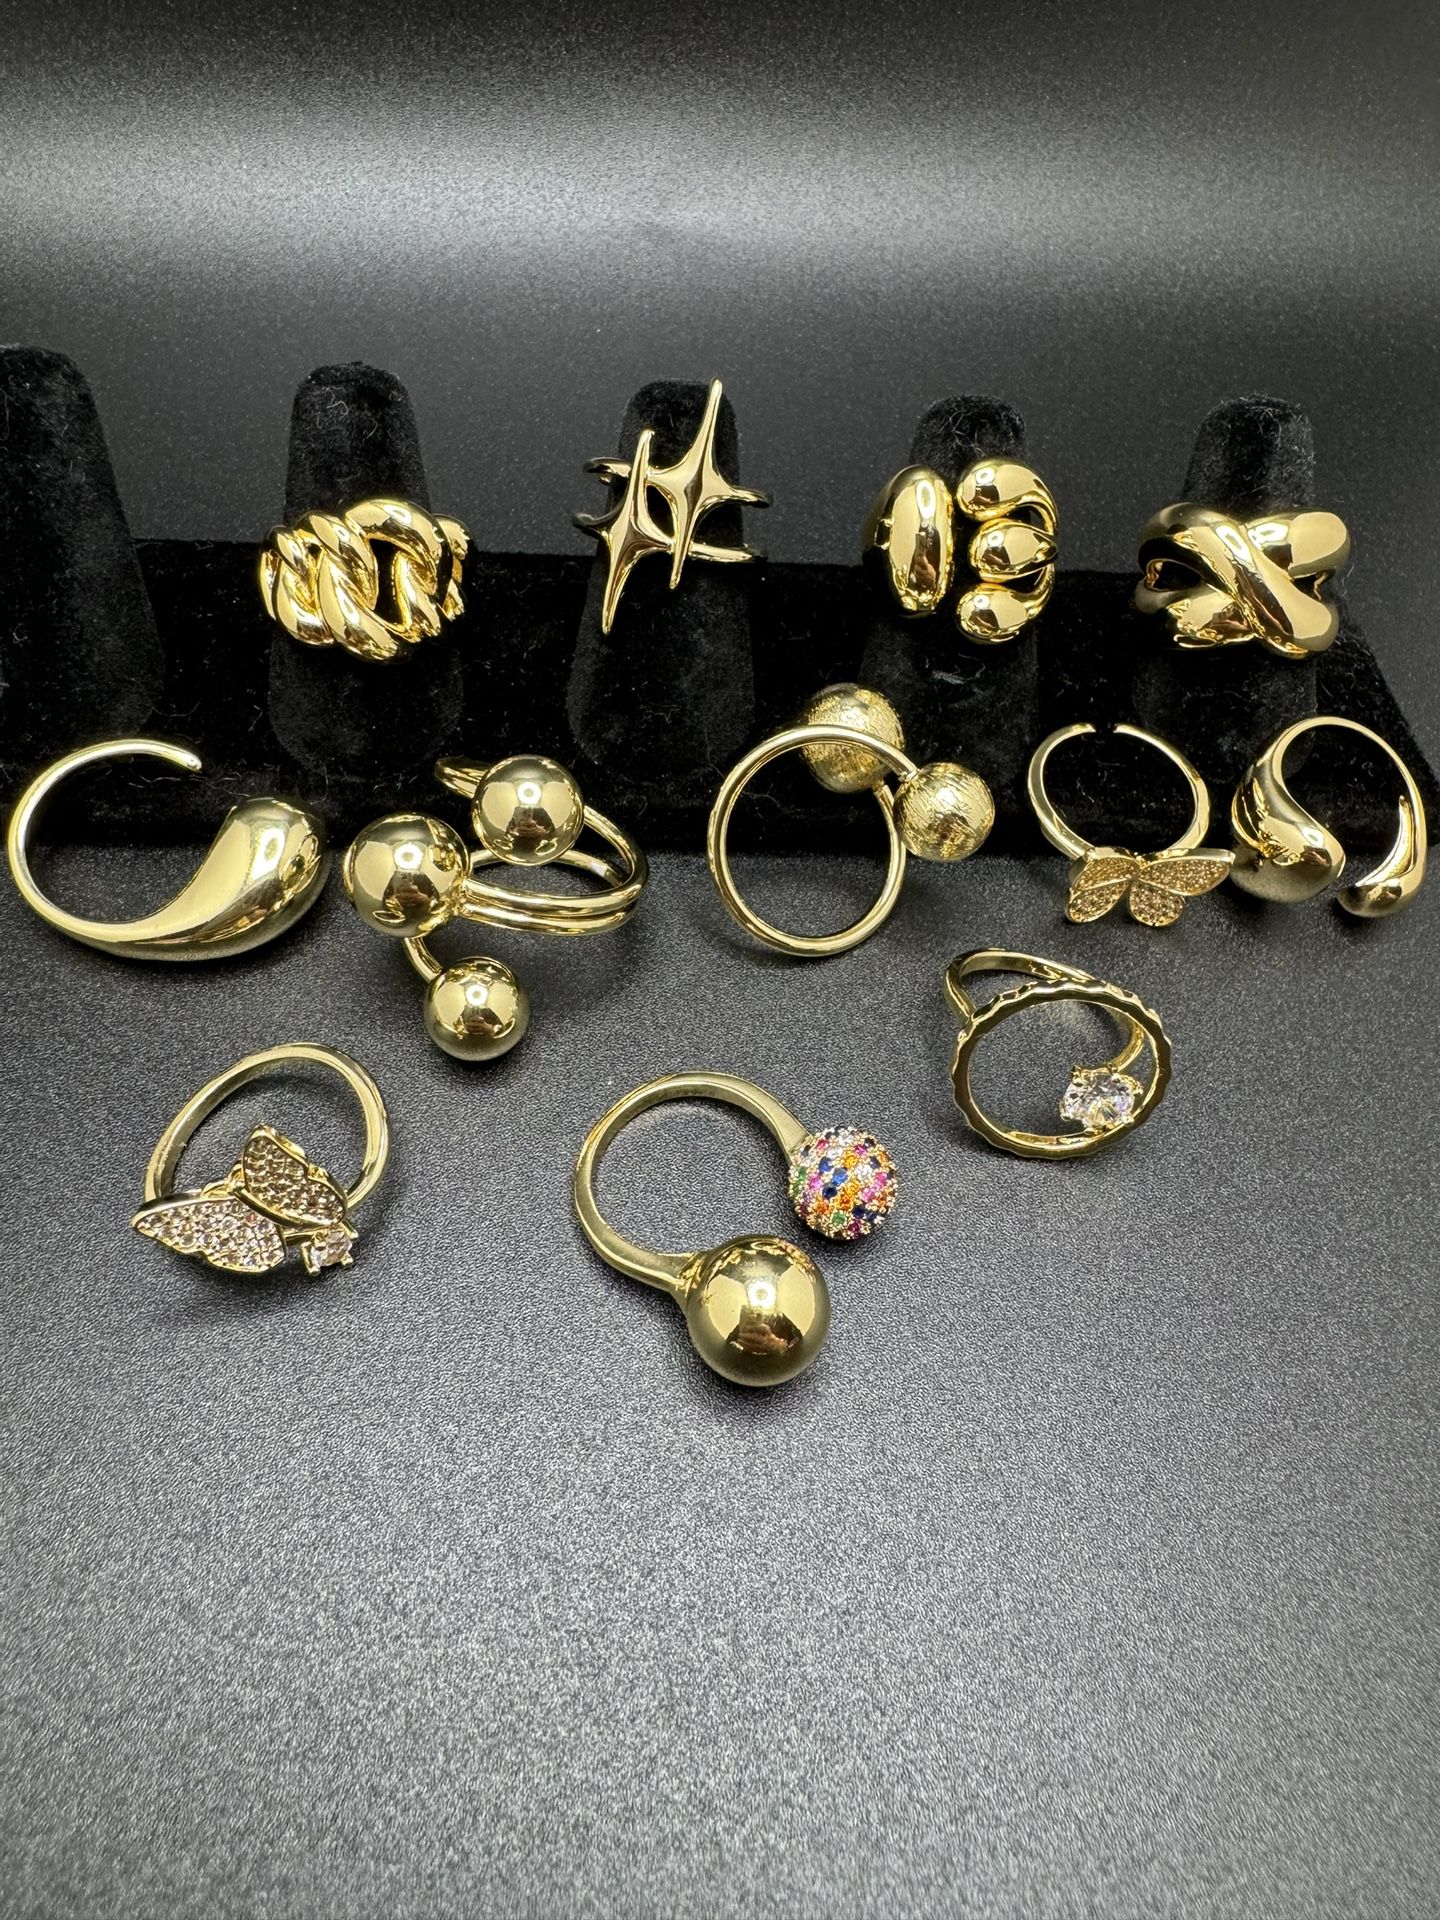 18k Gold Plated Rings $10 Ea